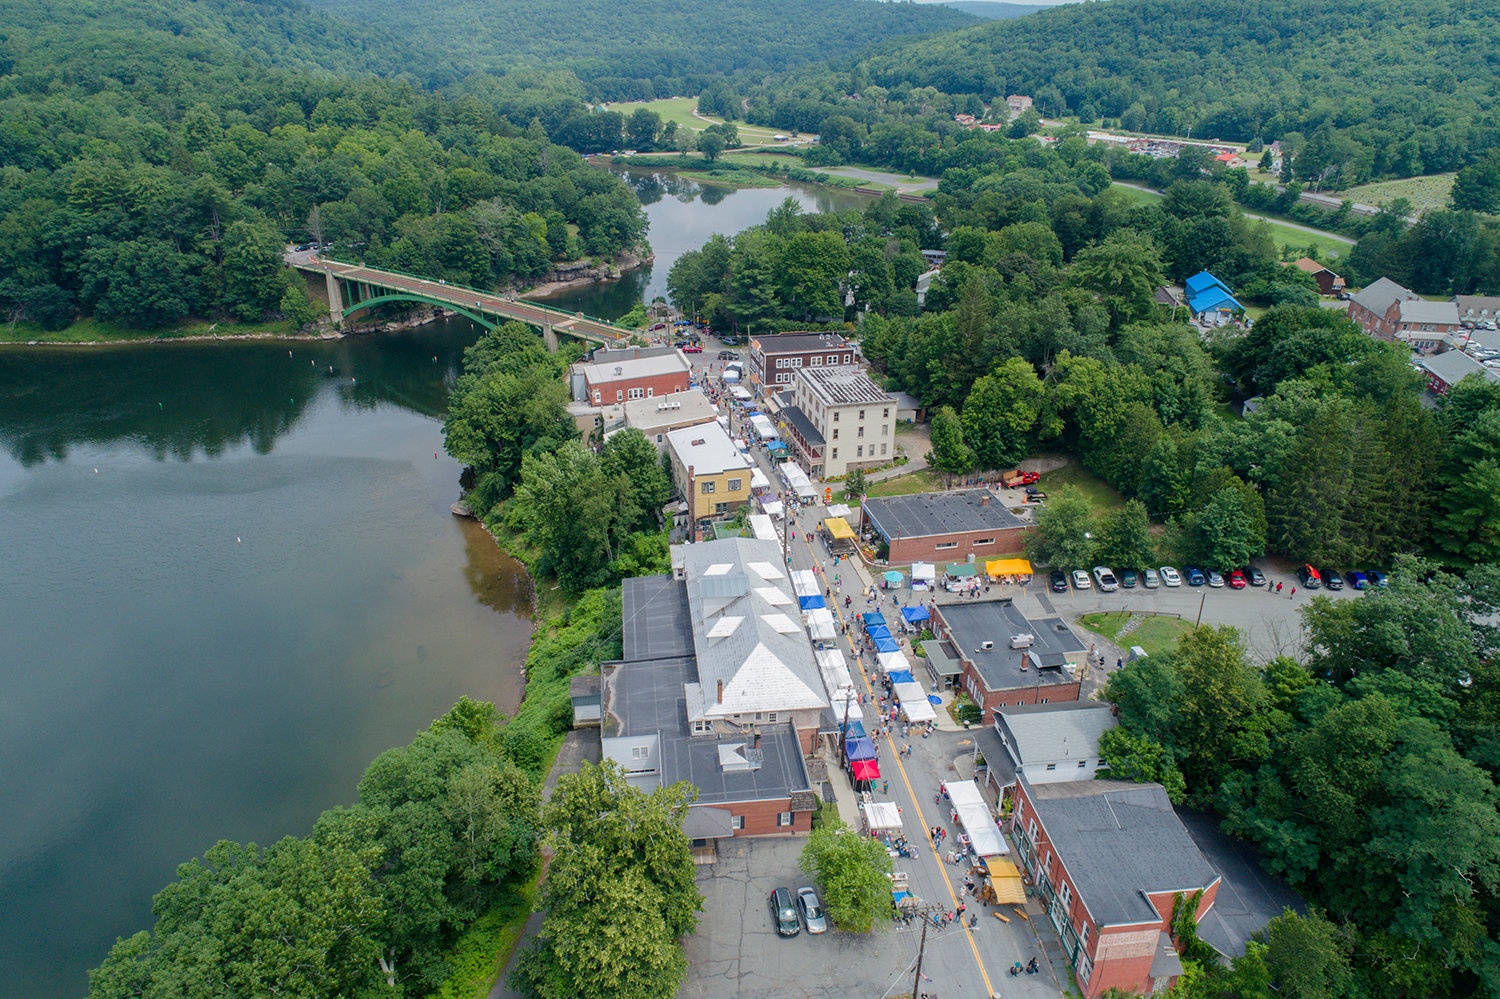 The hamlet of Narrowsburg will shine at Riverfest.